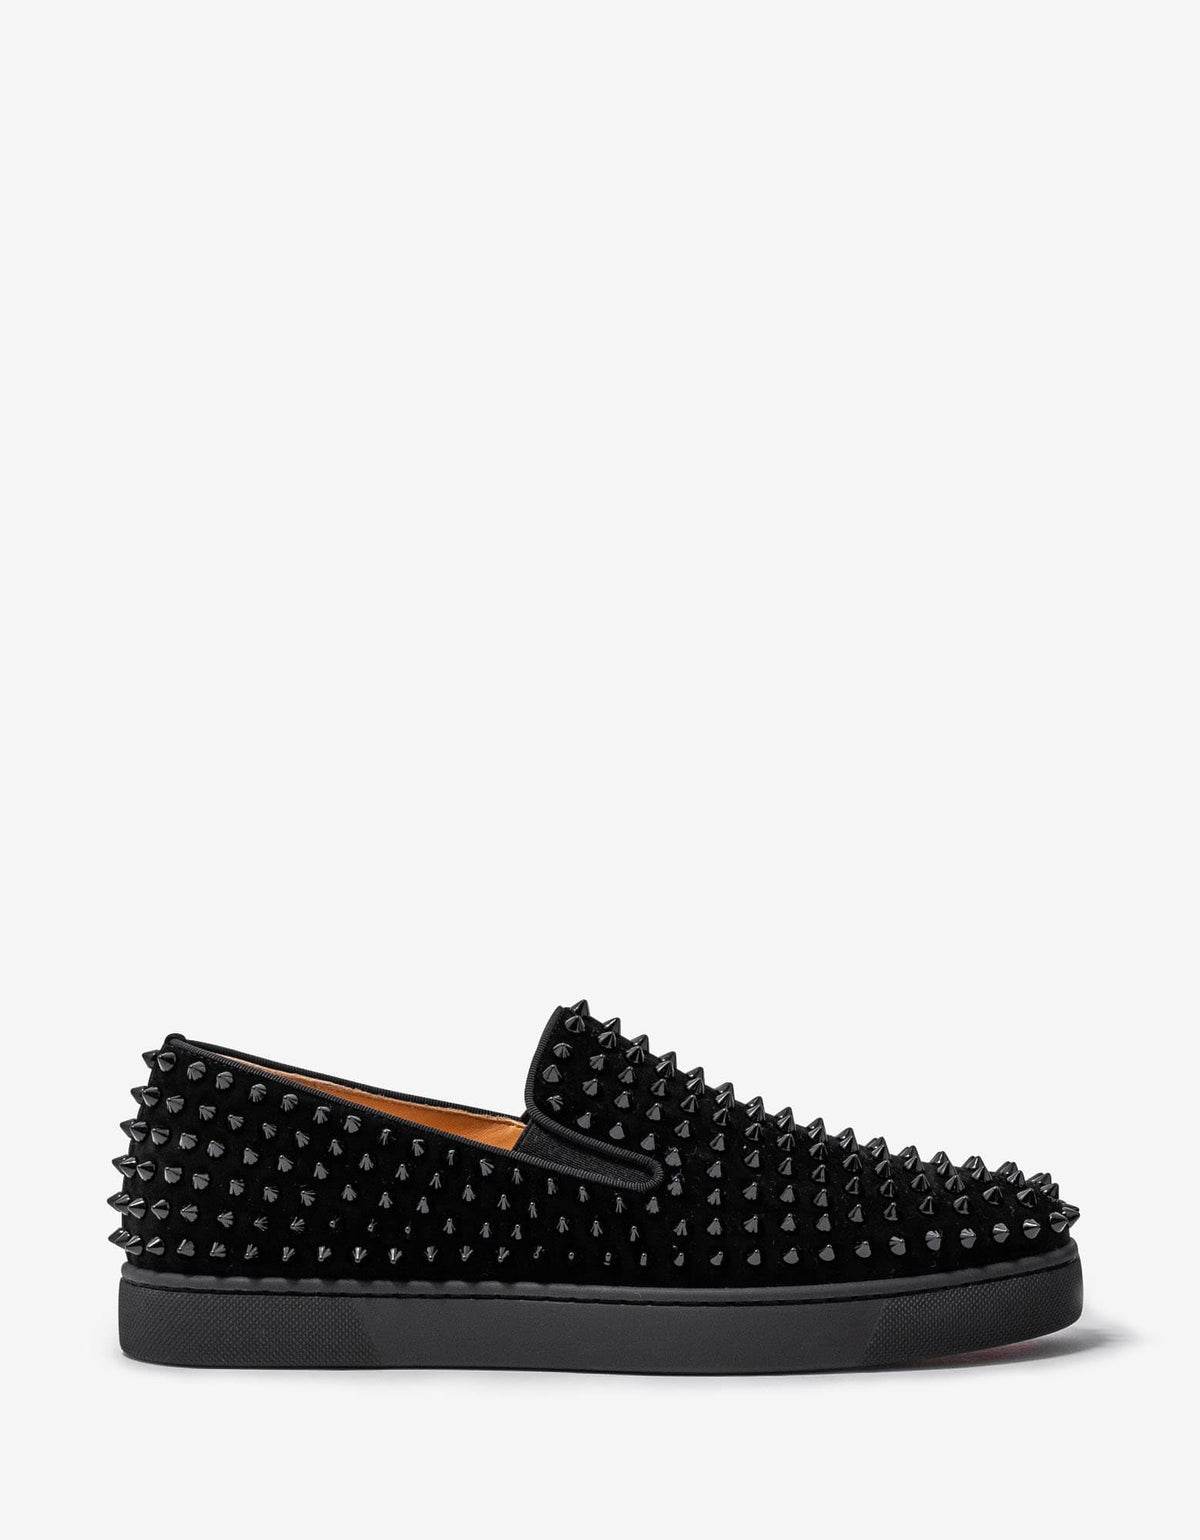 Christian Louboutin Roller-Boat Black Suede Trainers -